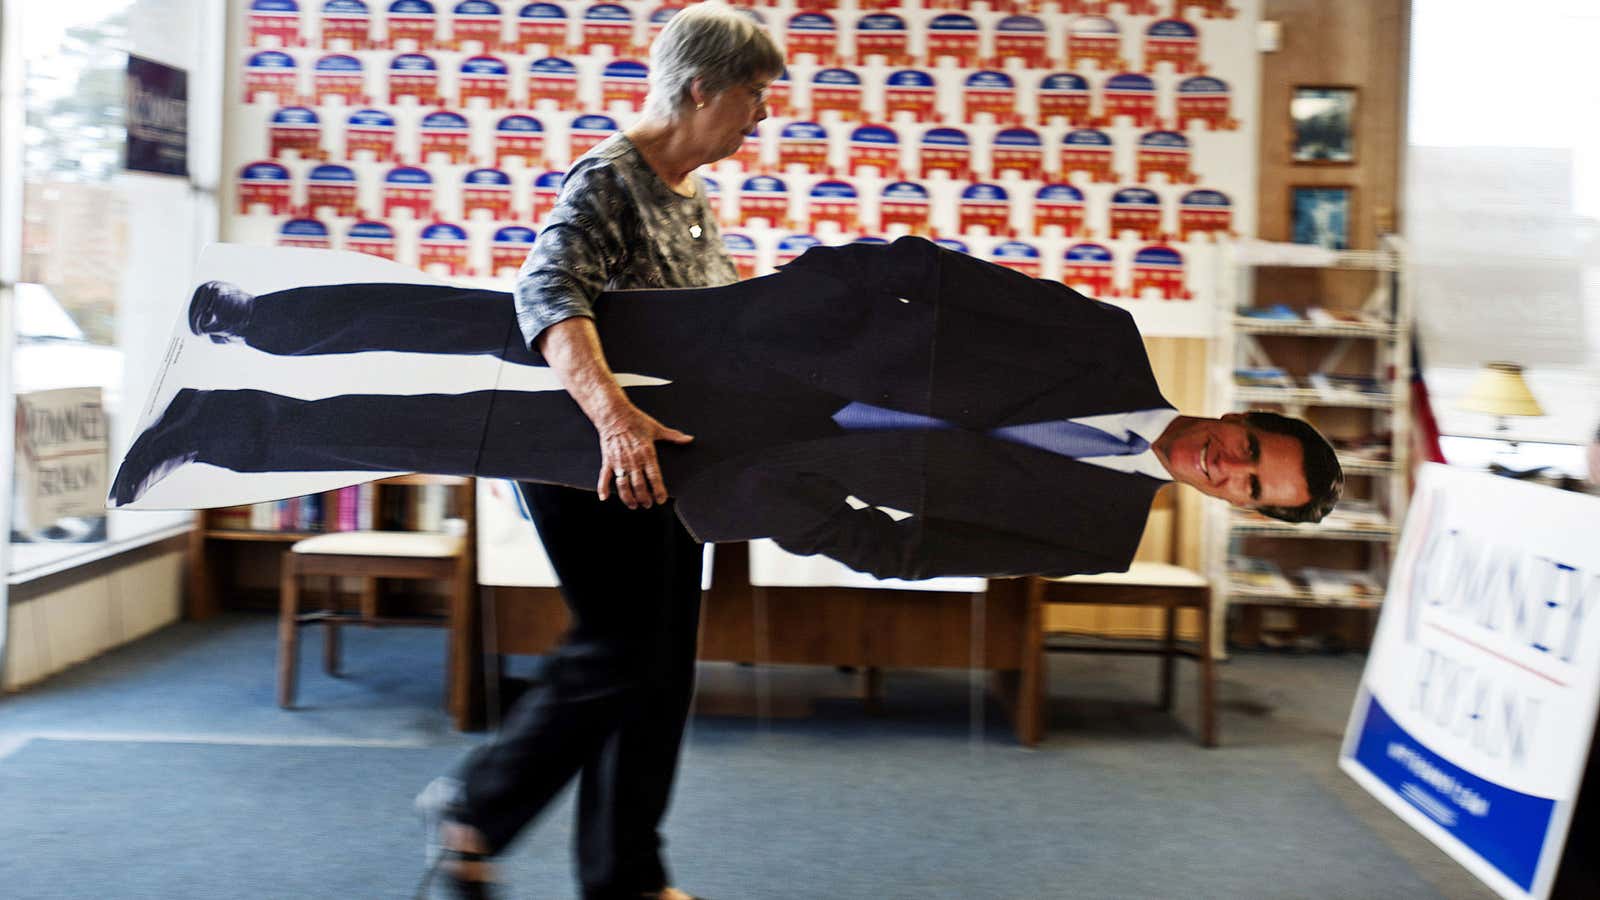 A volunteer puts away a life-size cut out of Mitt Romney